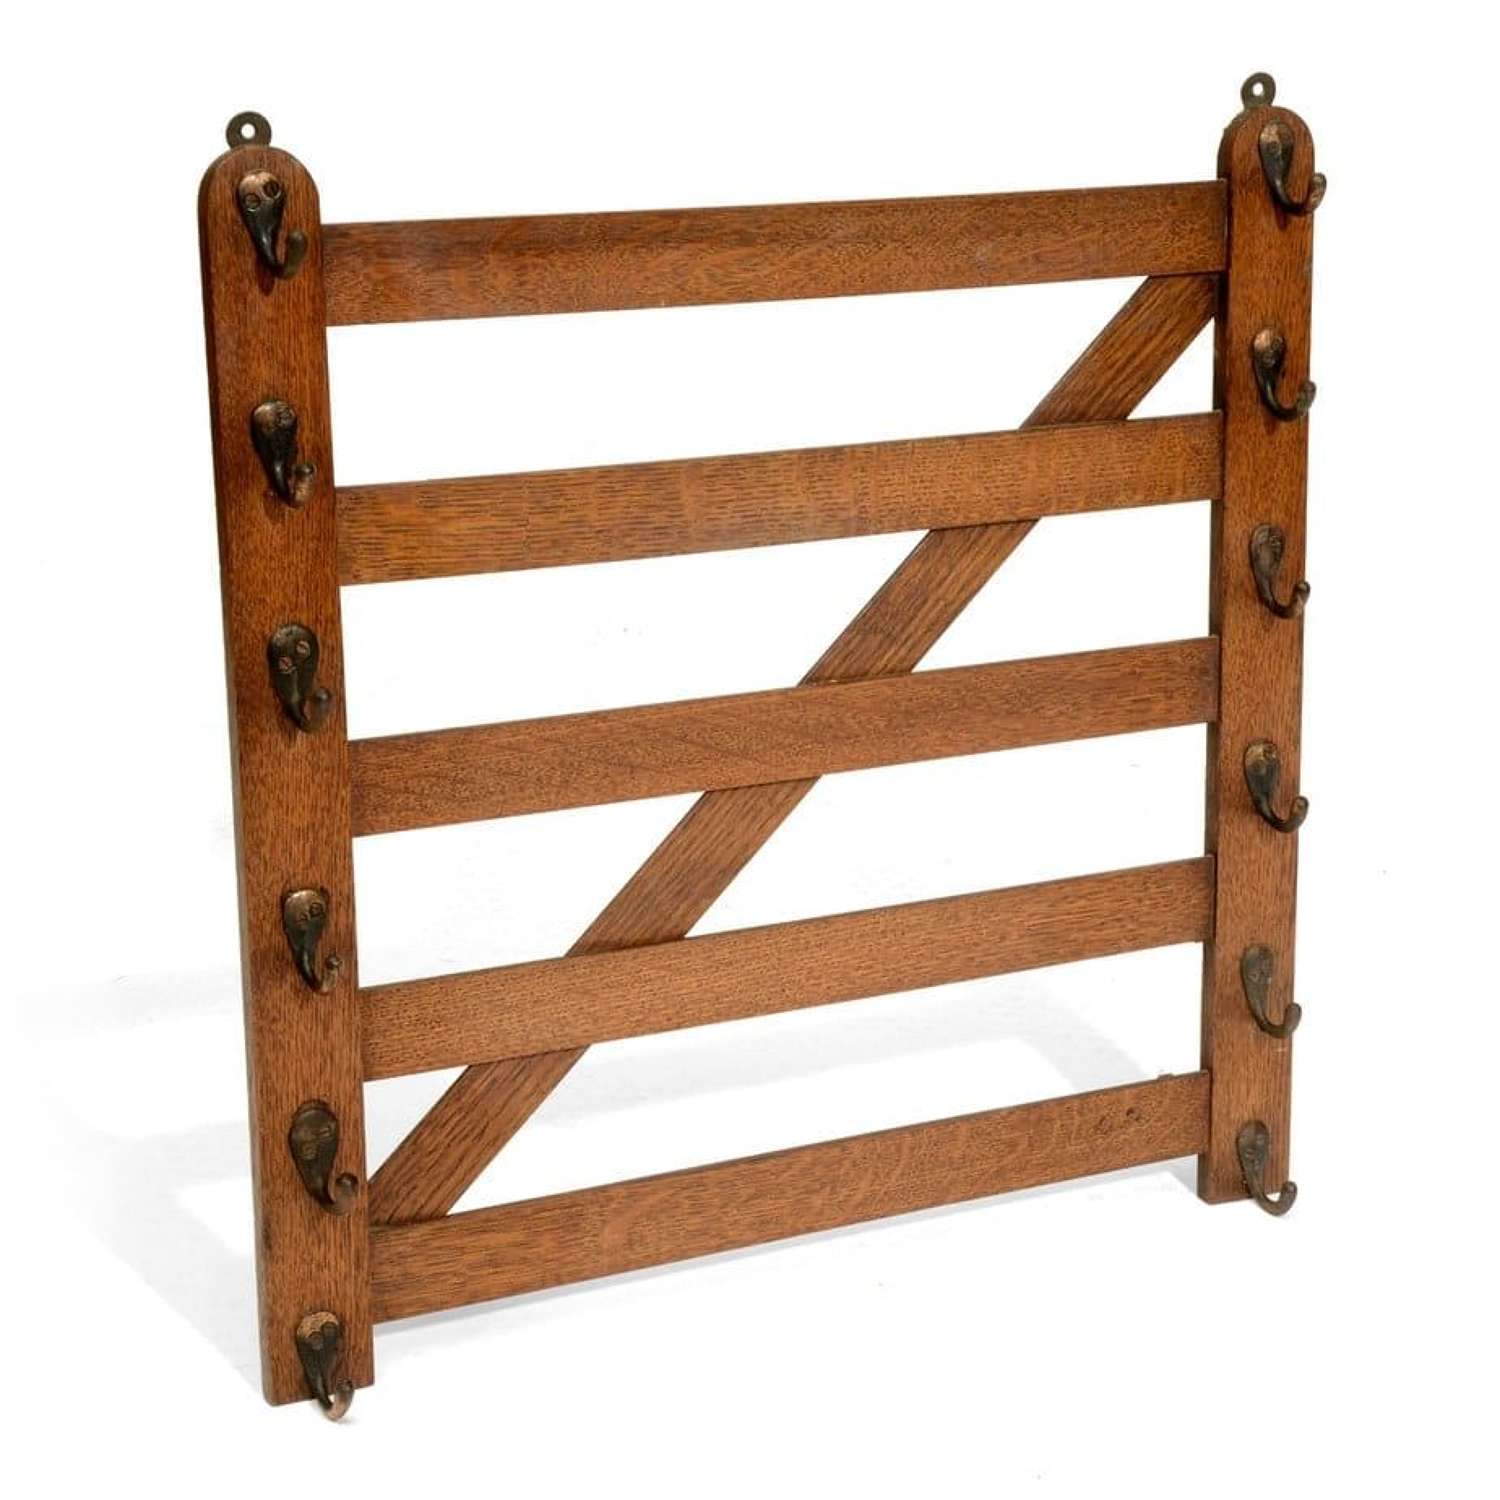 Oak whip-rack in the form of a 5 bar gate